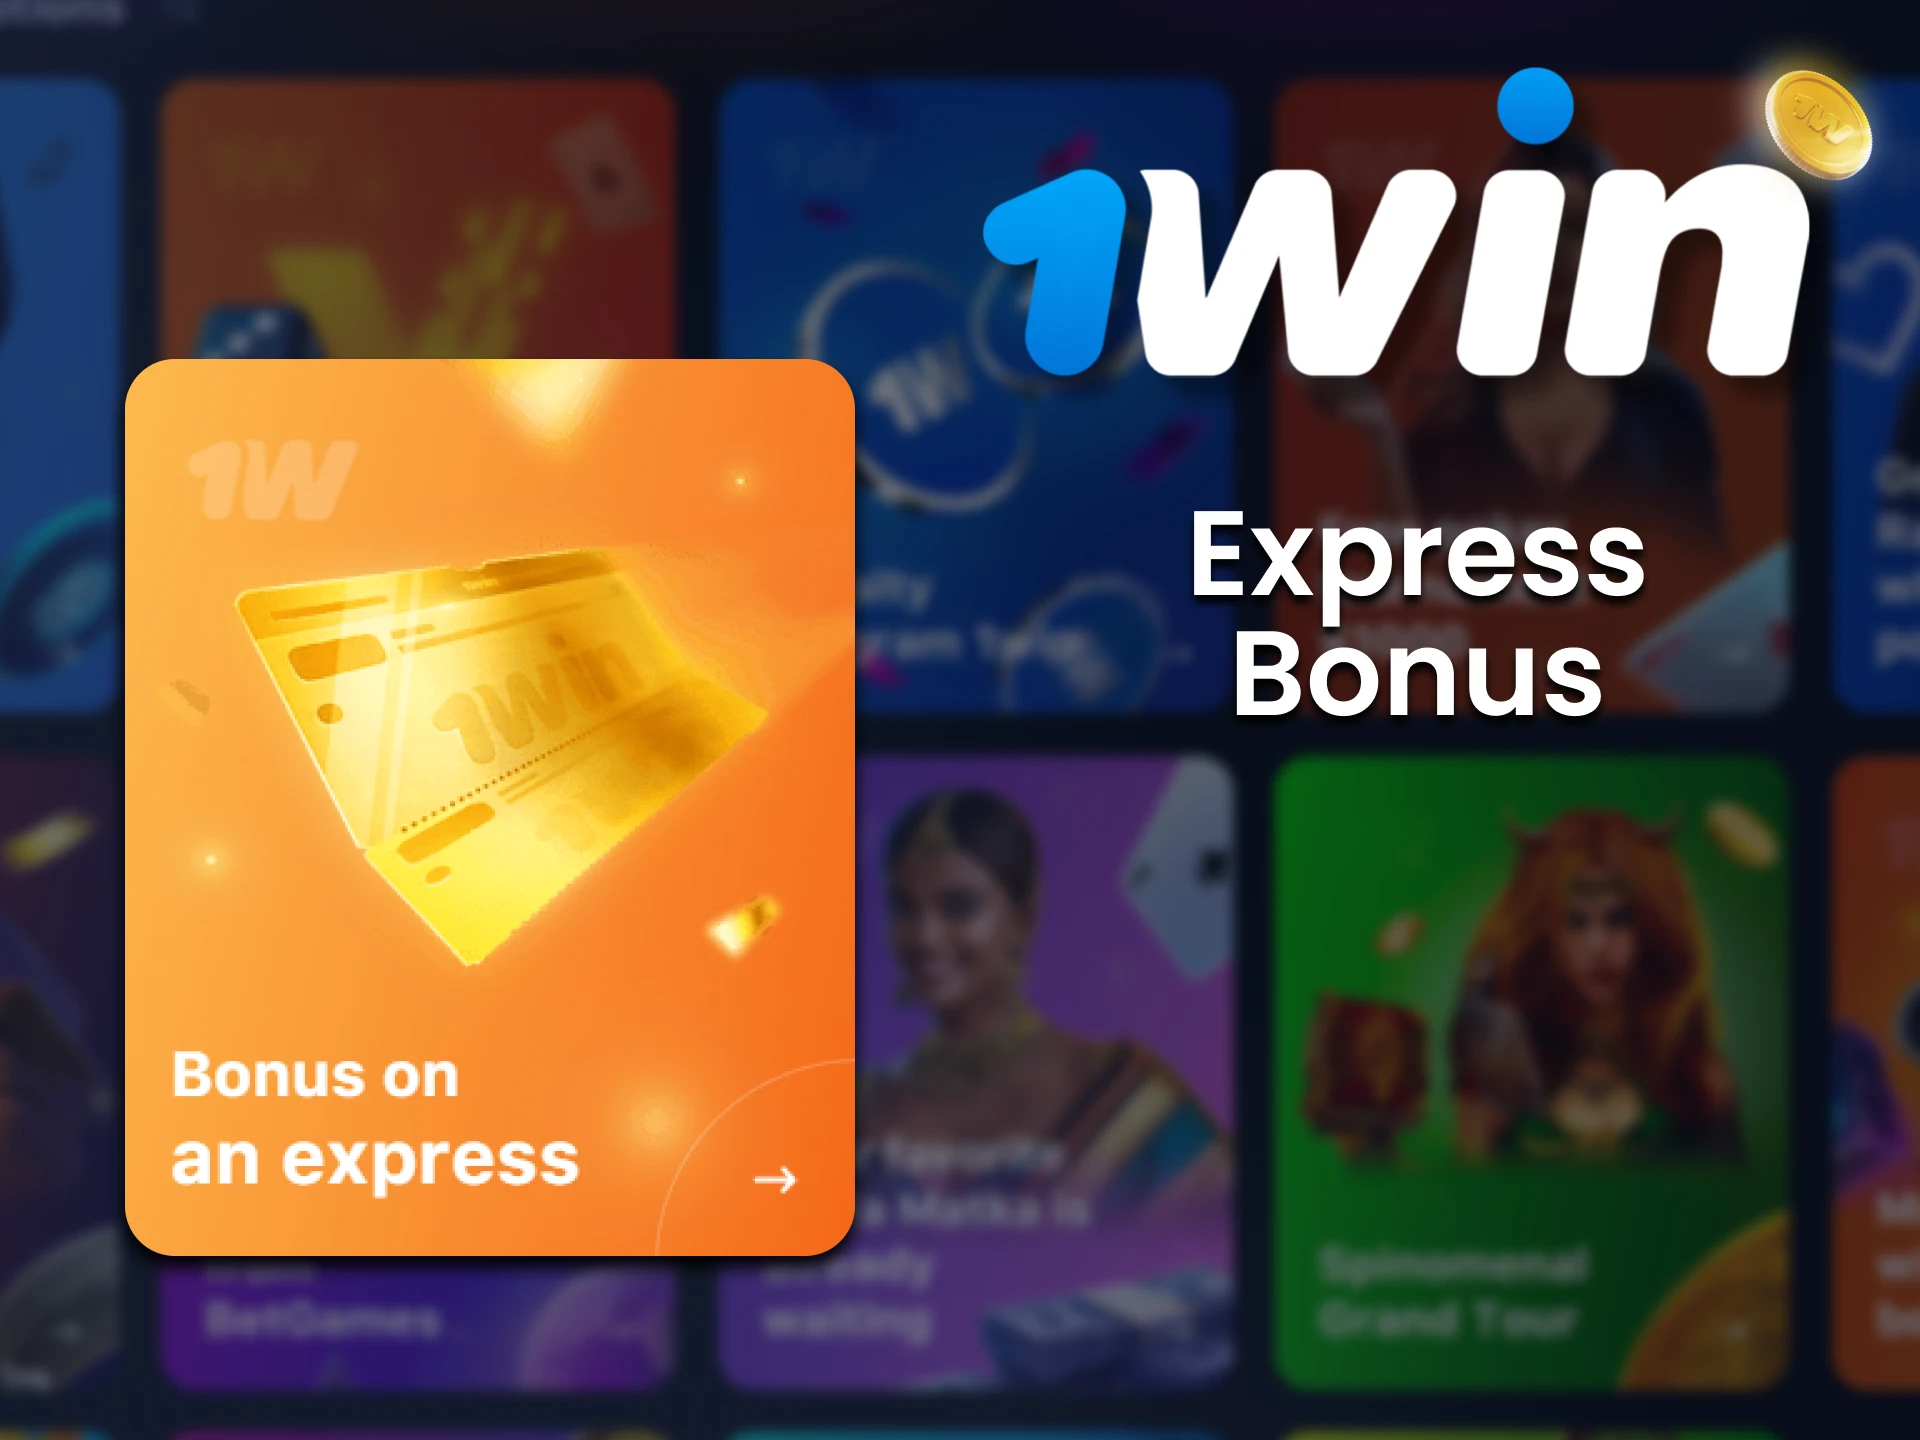 Place bets on 5 sports events and get a special express 1win bonus.